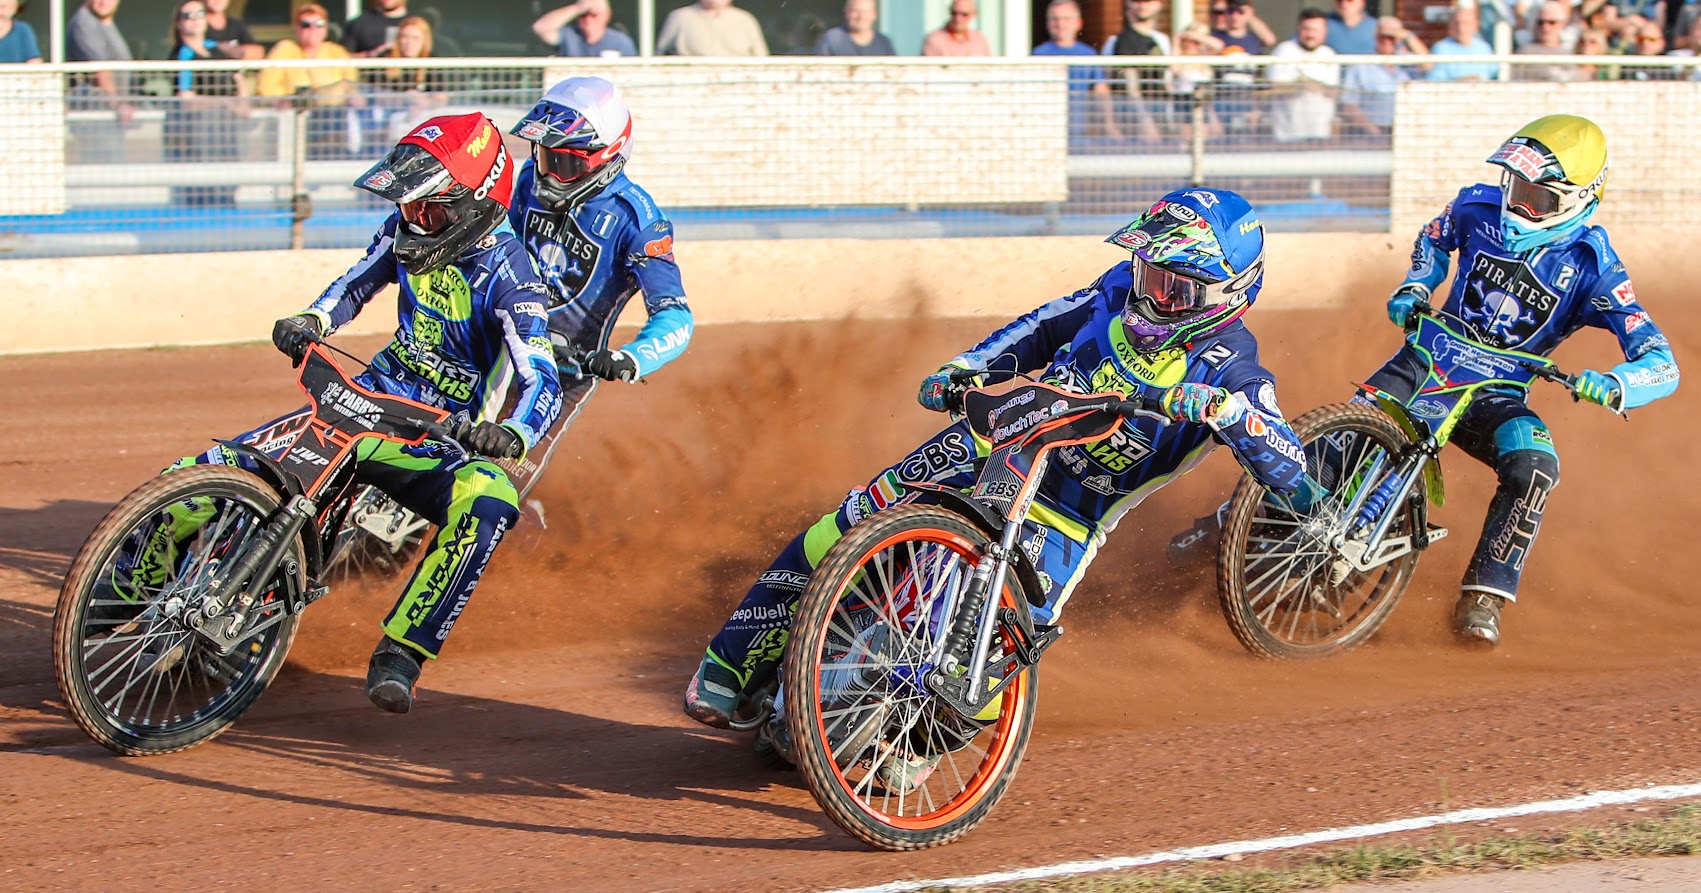 Schroeck targets Oxford Cheetahs response when the Poole Pirates visit OX4